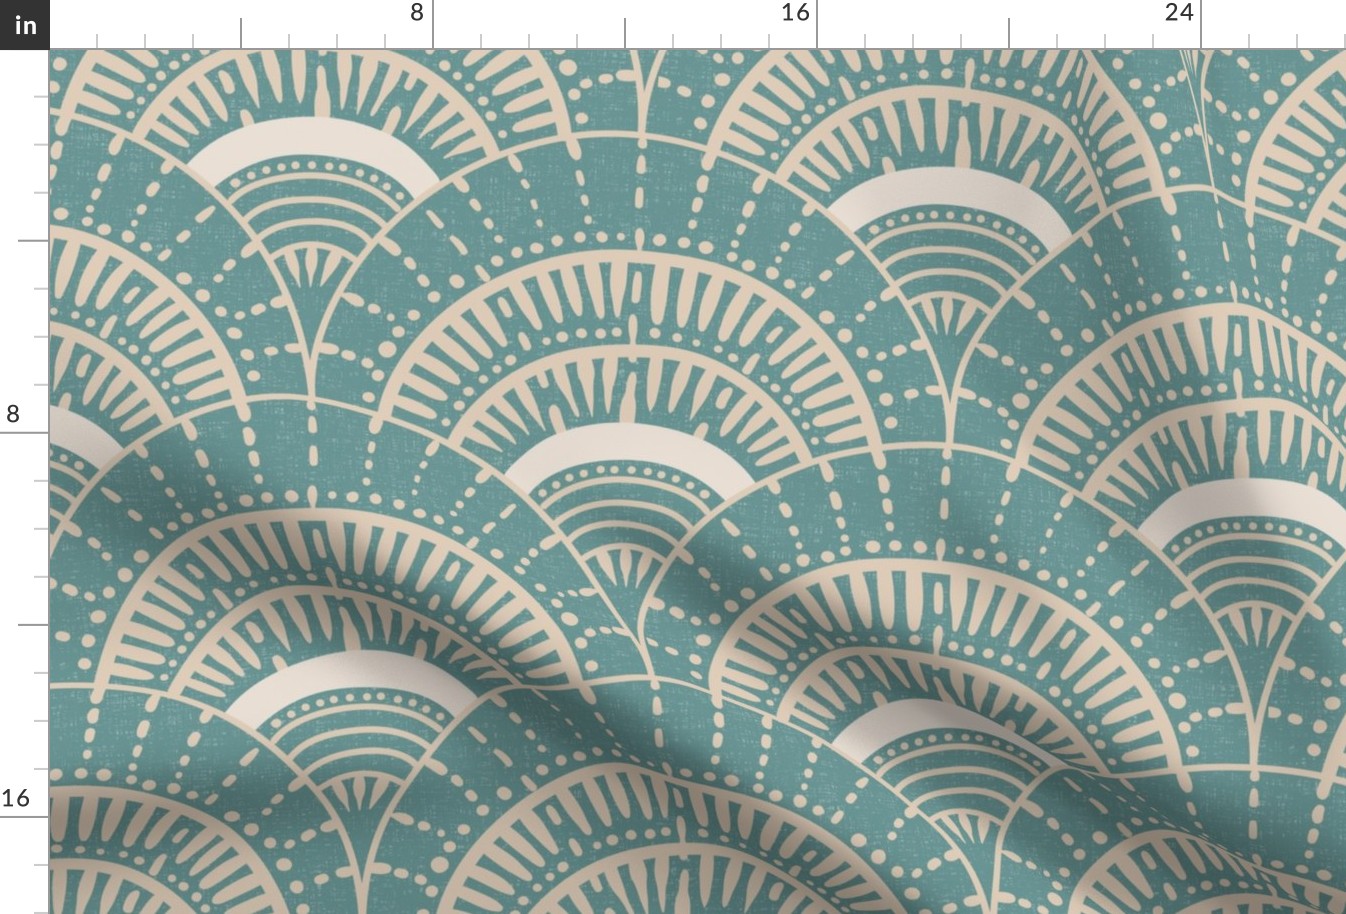 Beach scallop, fan - desert sand on opal shadow, teal - coordinate for A trip to the beach - large